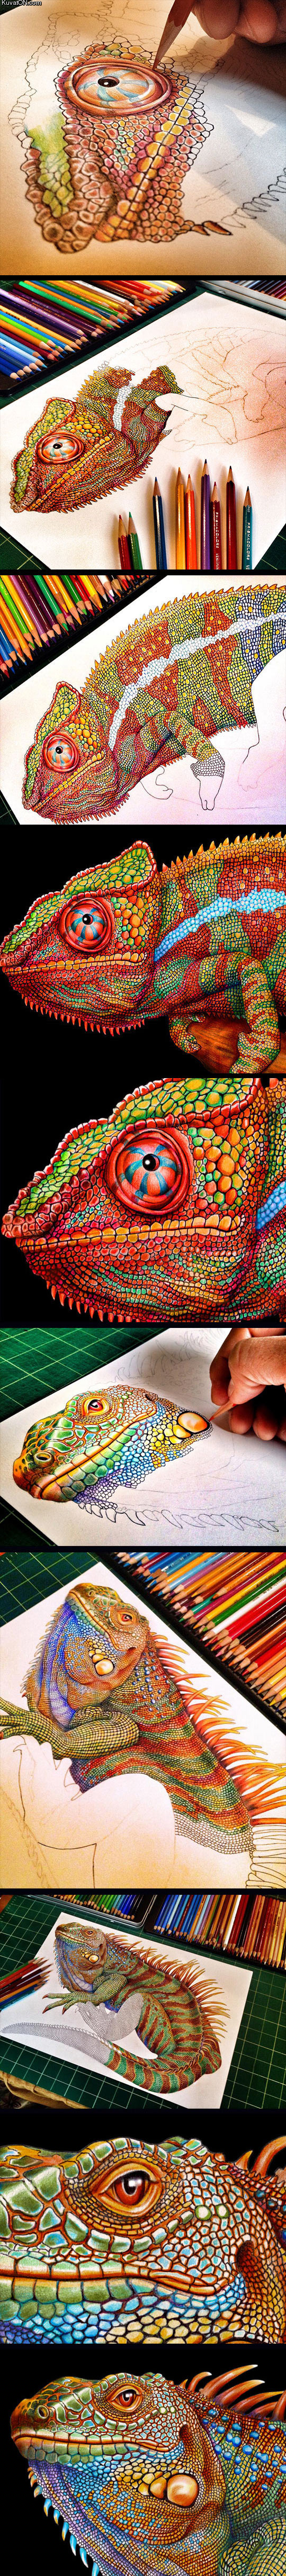 incredibly_detailed_drawing_of_a_chameleon.jpg